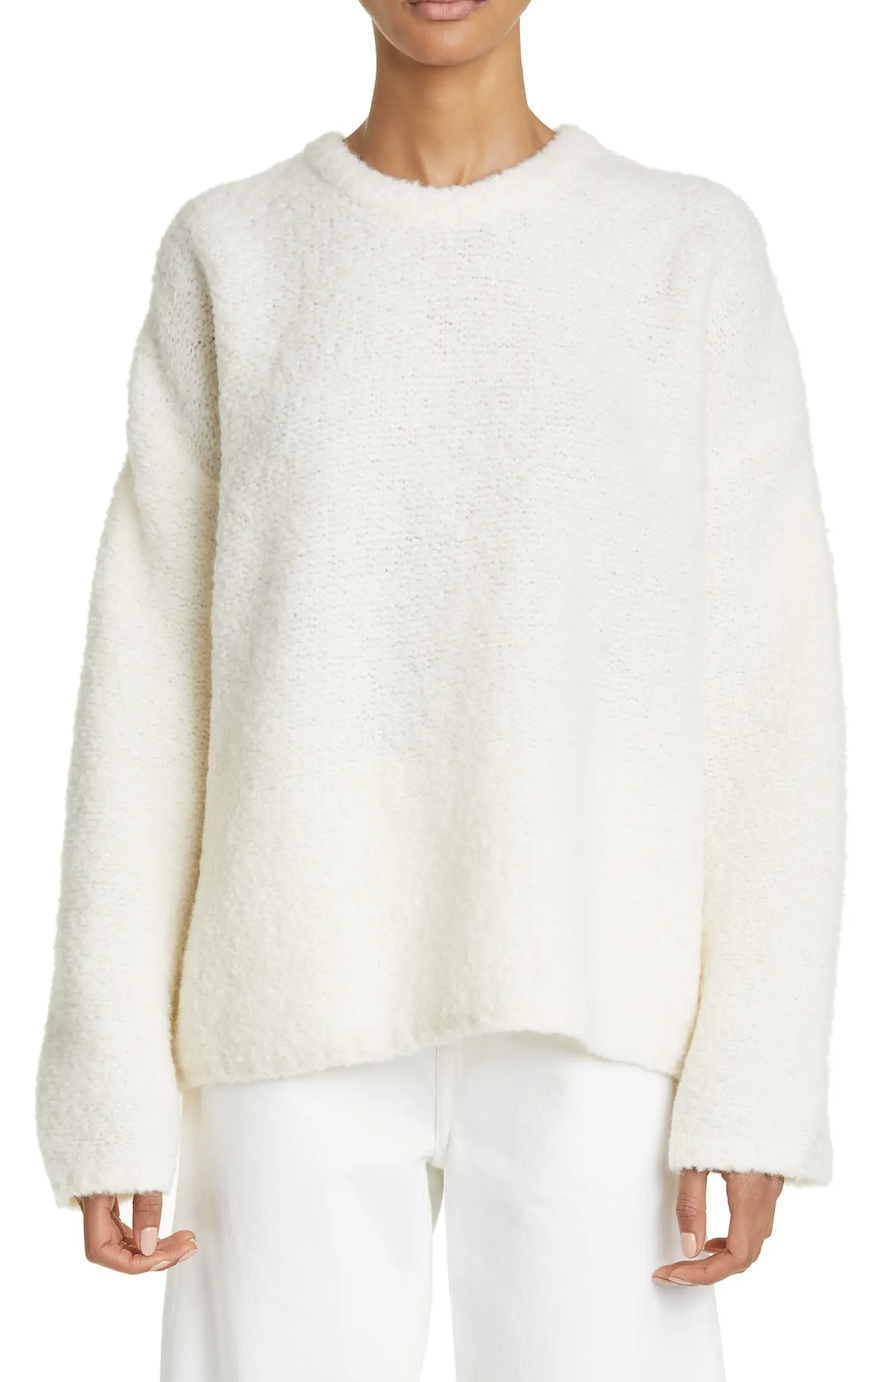 Sweater Weather Is Here! Here Are Some You'll Want To Live In ...